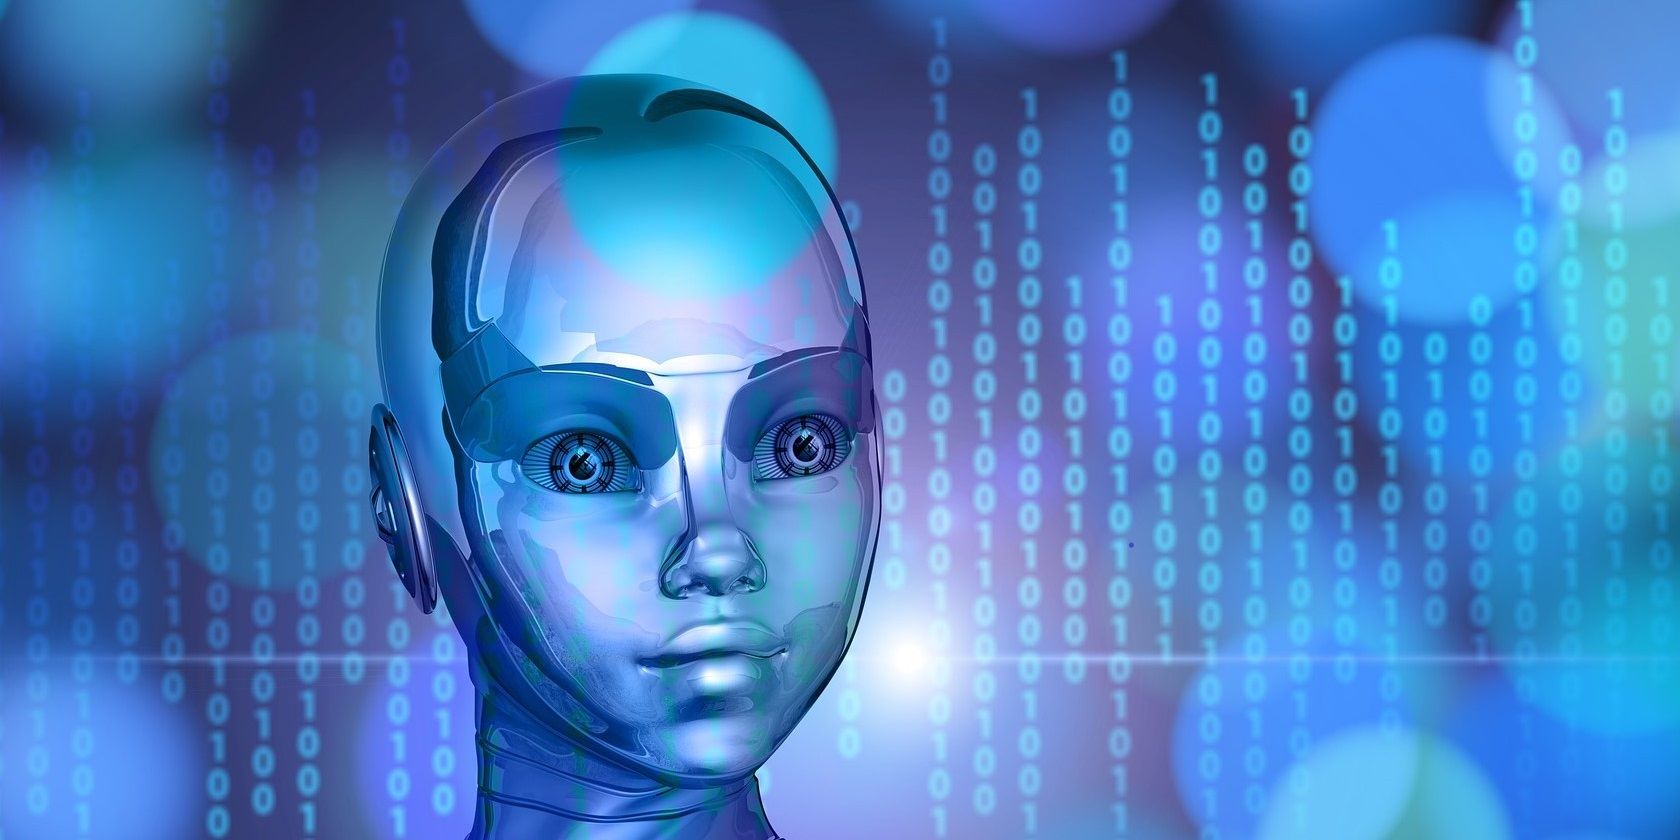 5 Common Myths About Artificial Intelligence That Aren’t True